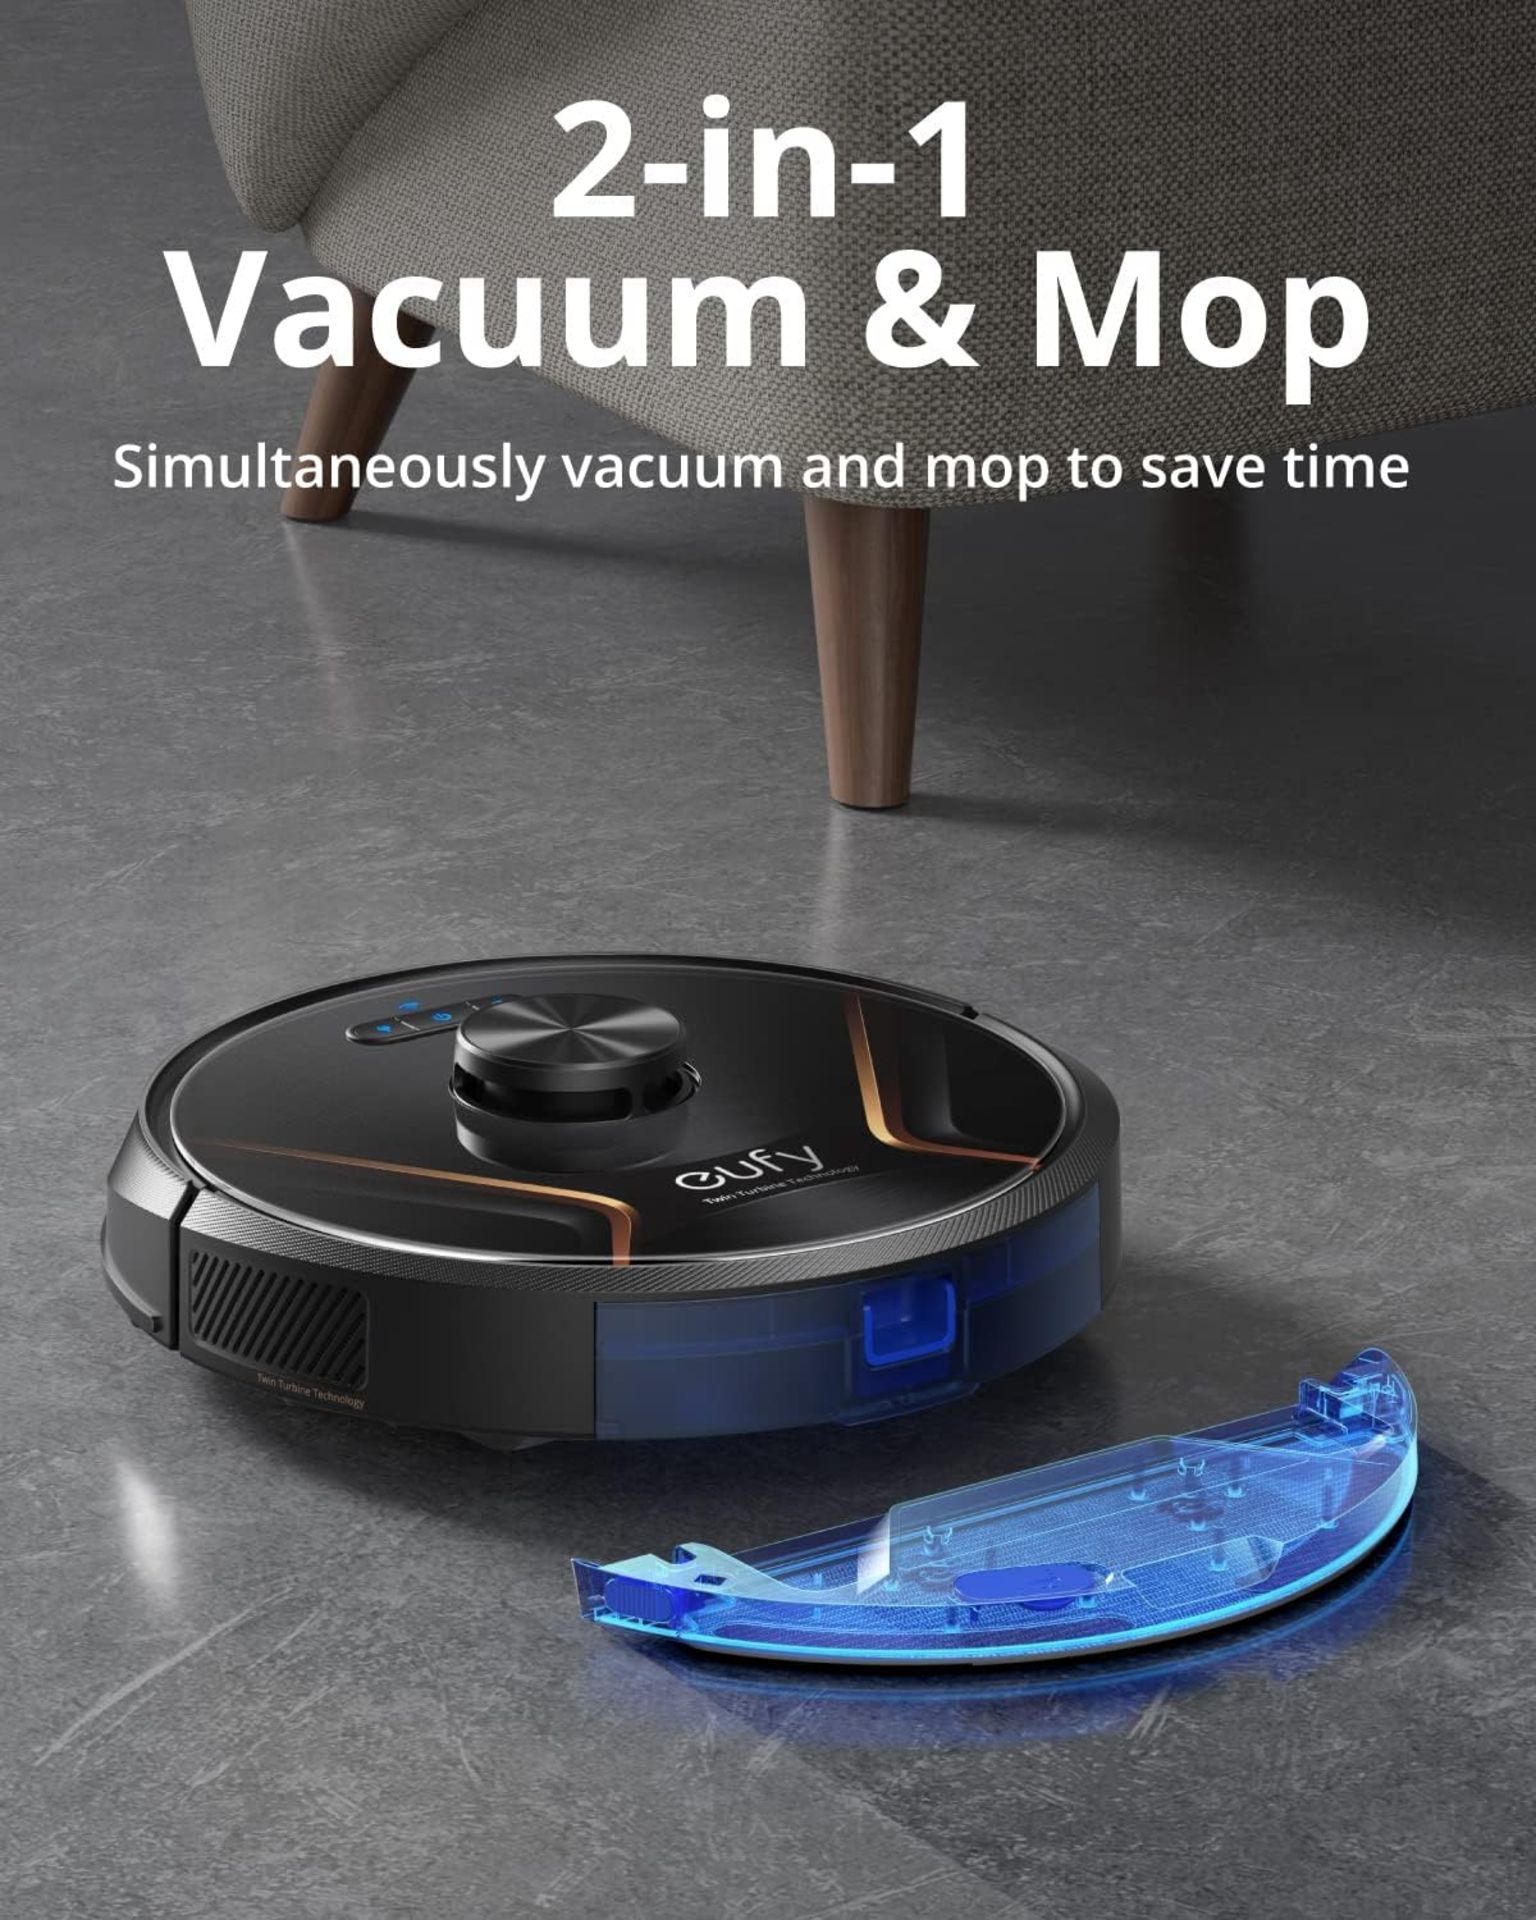 EUFY Robovac X8 Dual Twin-Tower Robot Vacuum Cleaner with iPath Laser Navigation. RRP £349.99. - Image 3 of 7